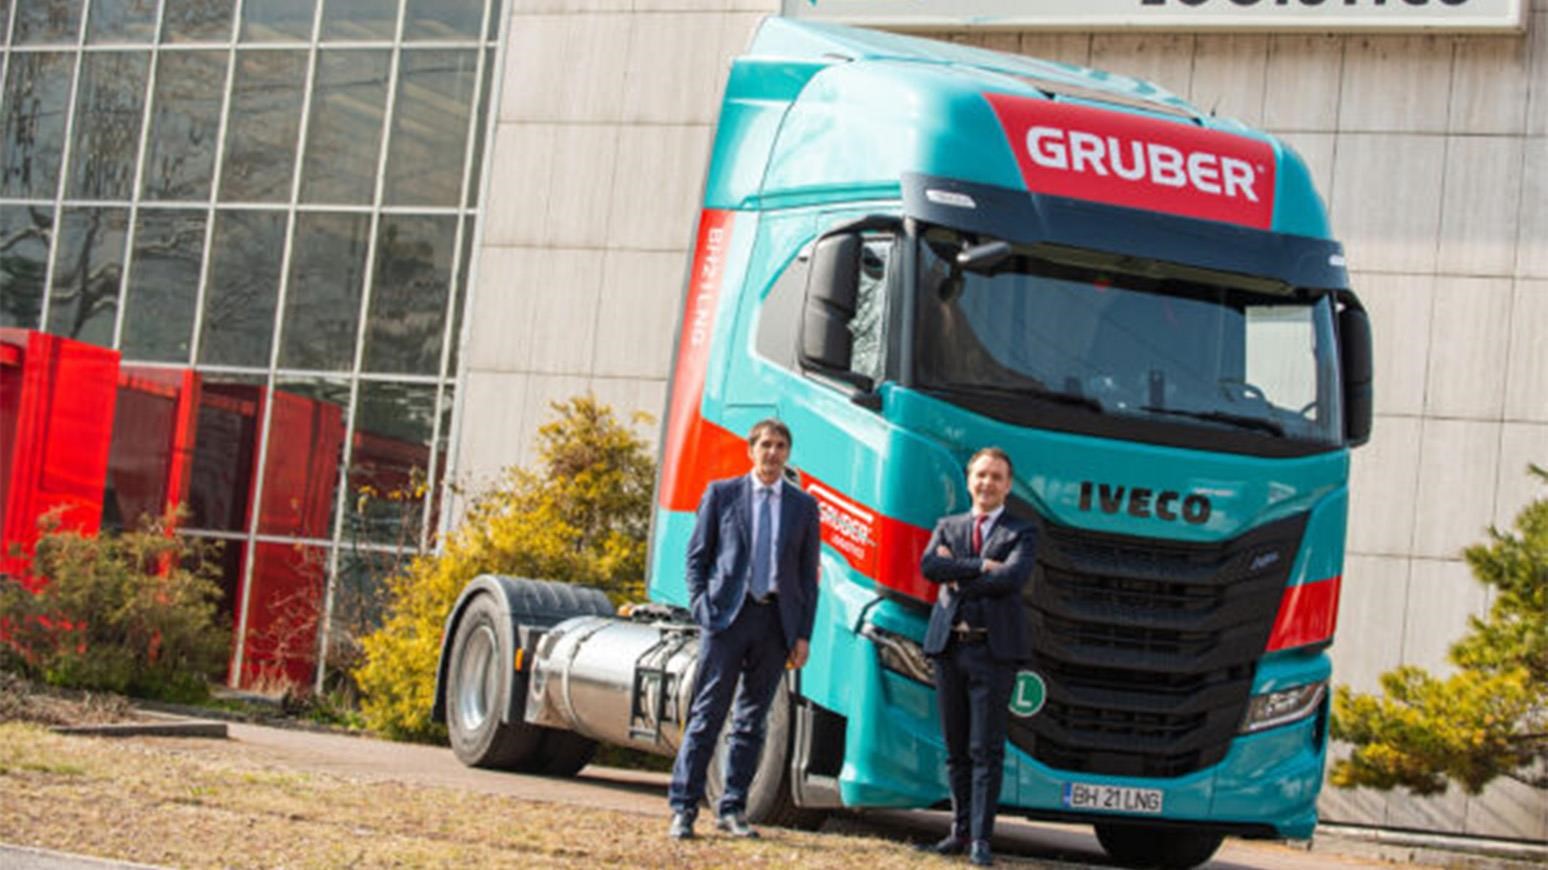 IVECO’s S-WAY LNG Now Able To Haul Overweight, Abnormal Loads For Germany’s Gruber Logistics